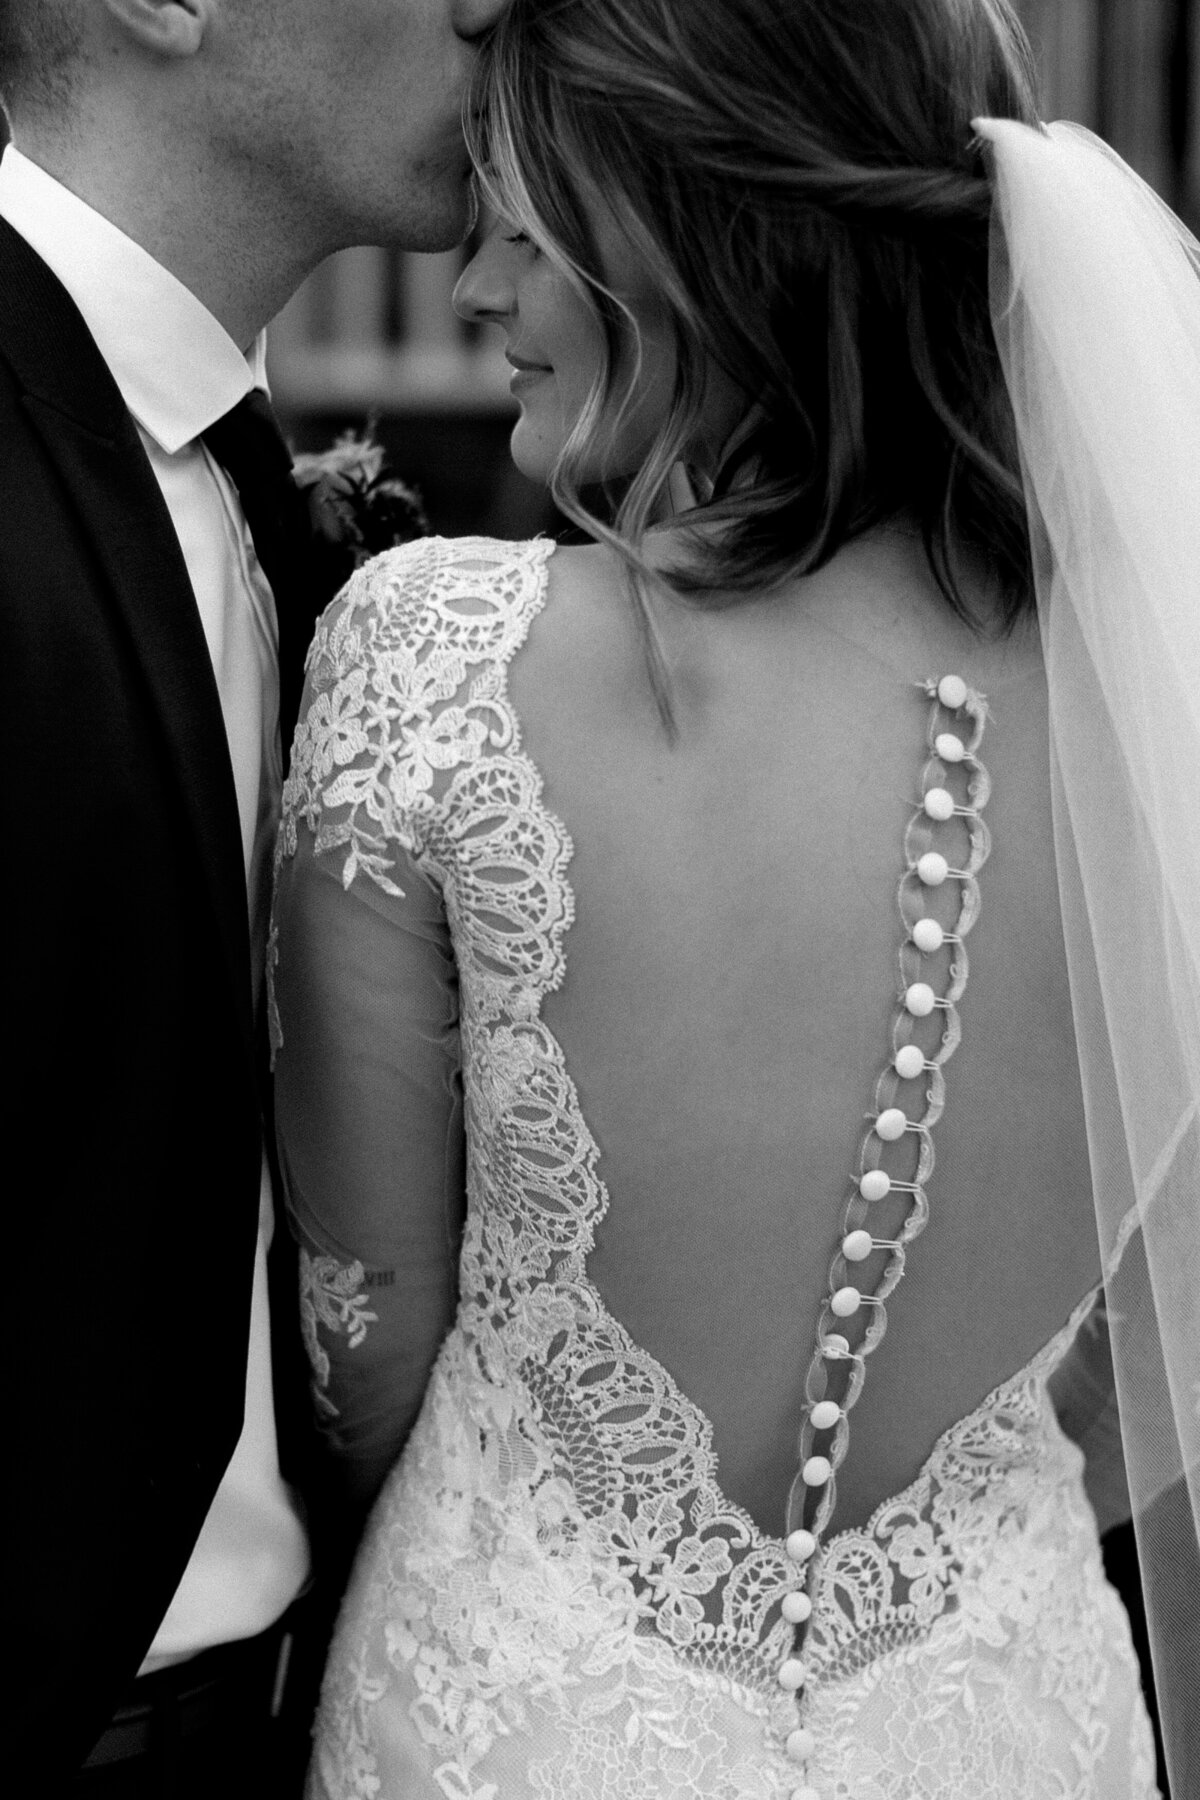 Back of brides dress with buttons going down the back and her head turned towards her groom and her groom kissing her on the forehead.